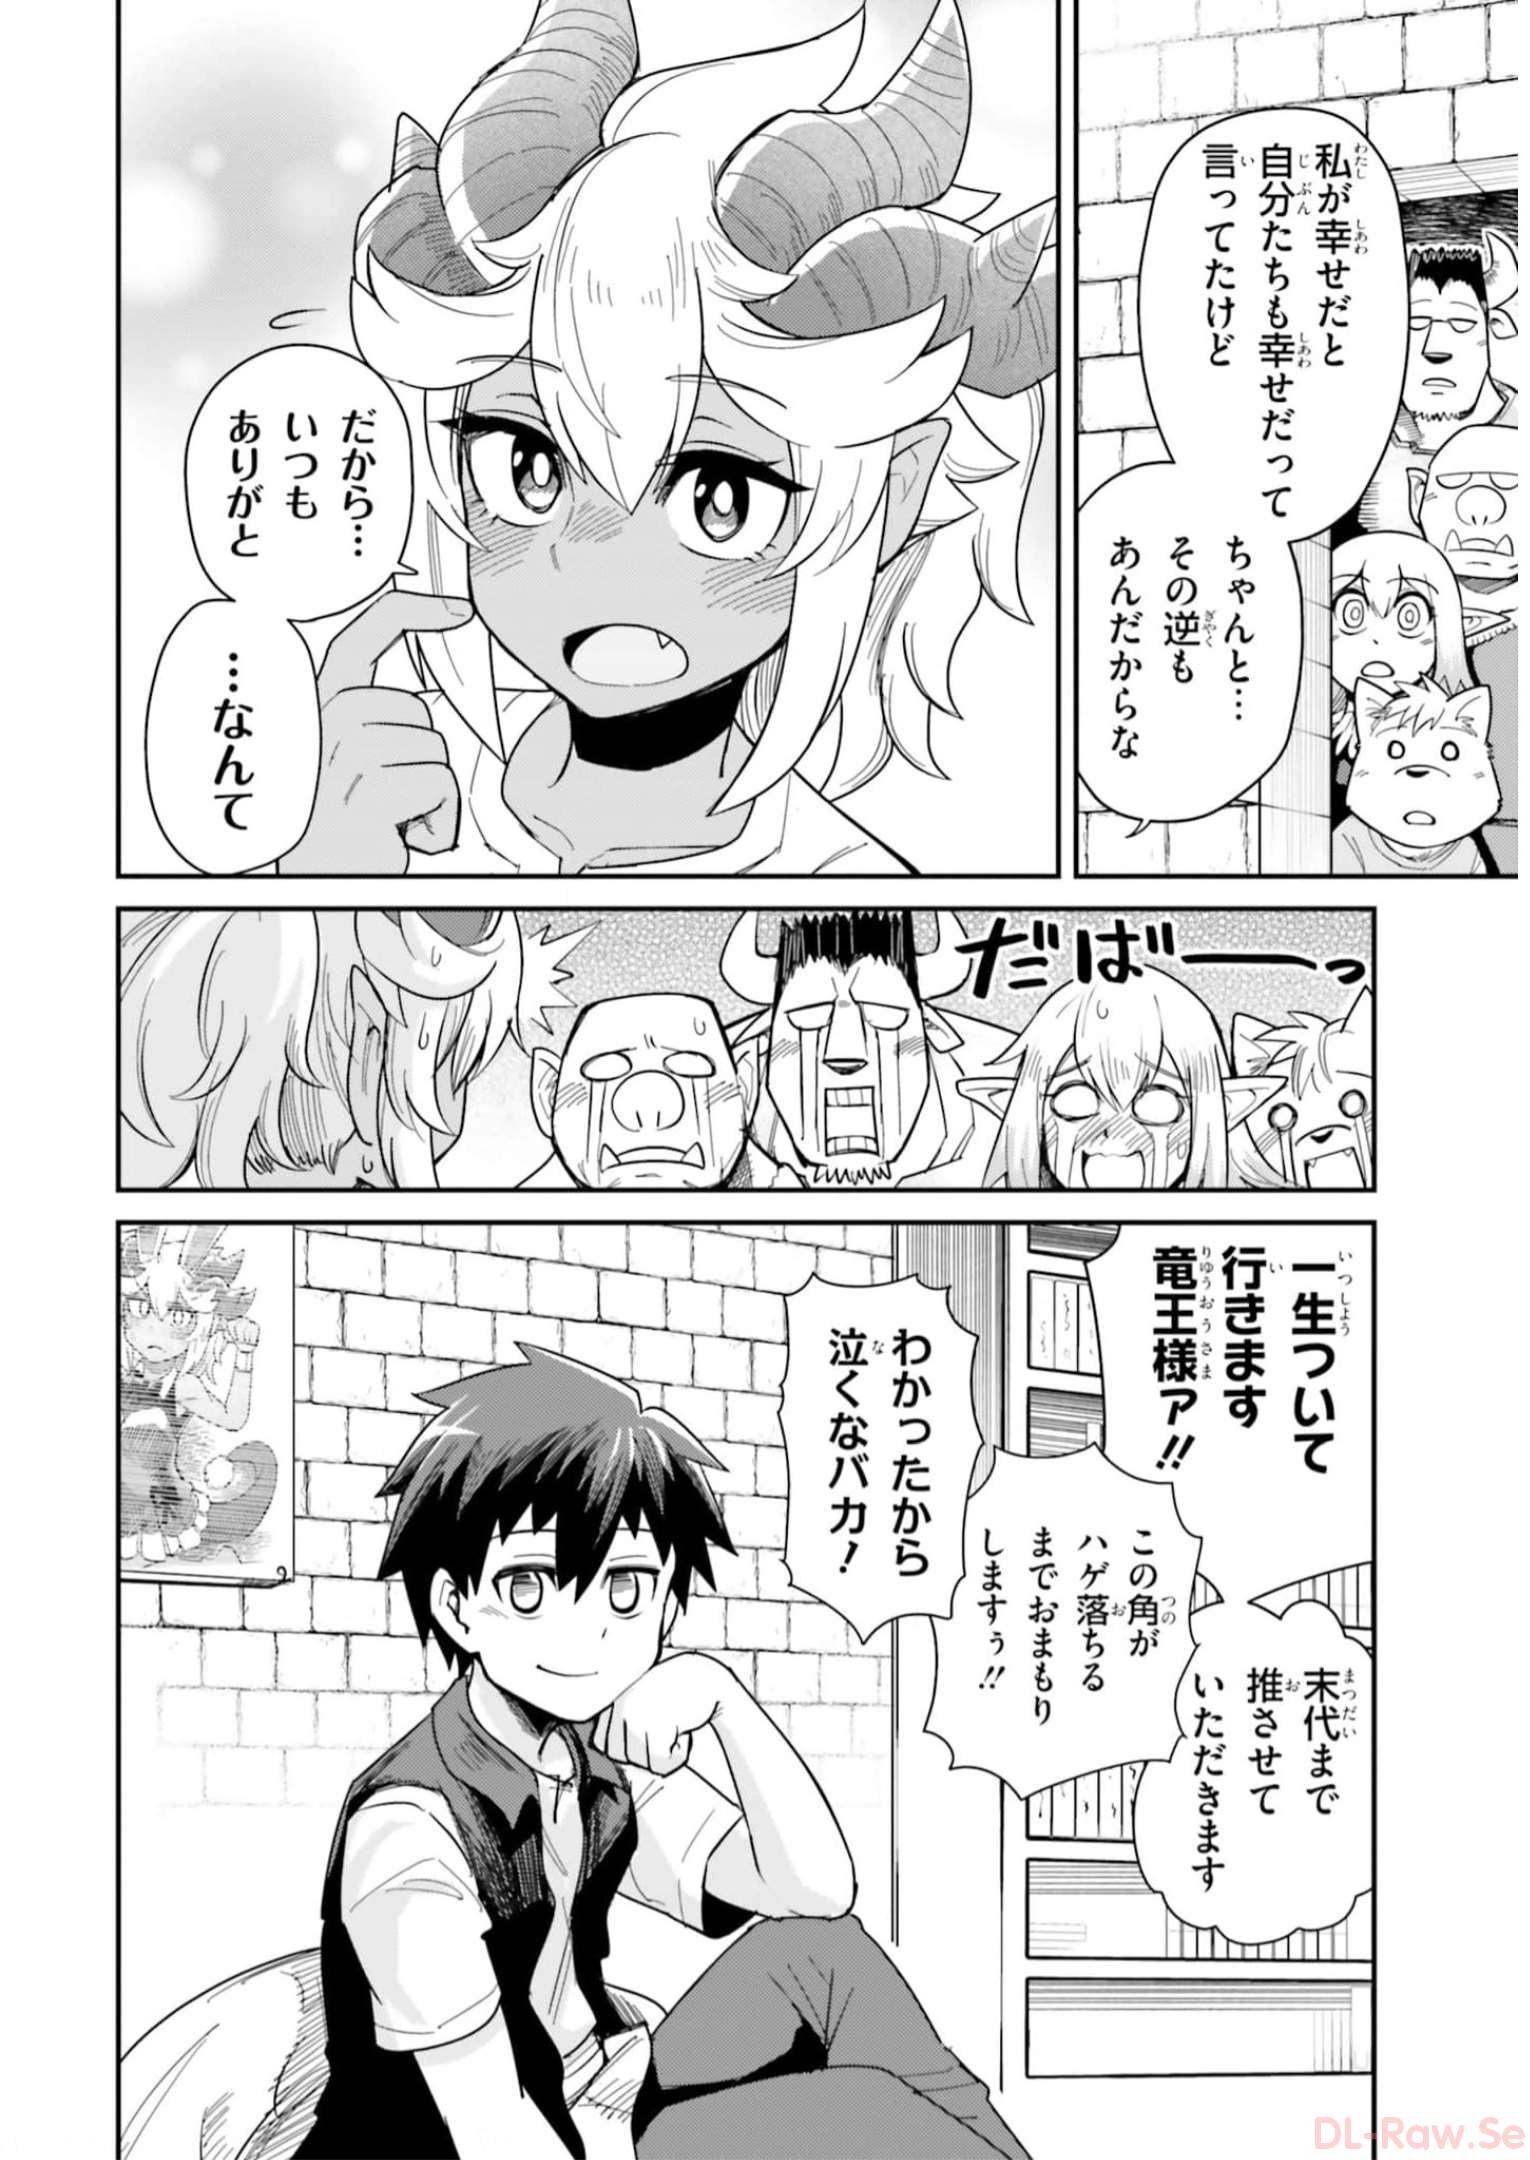 Dungeon Friends Forever Dungeon’s Childhood Friend ダンジョンの幼なじみ 第22話 - Page 17